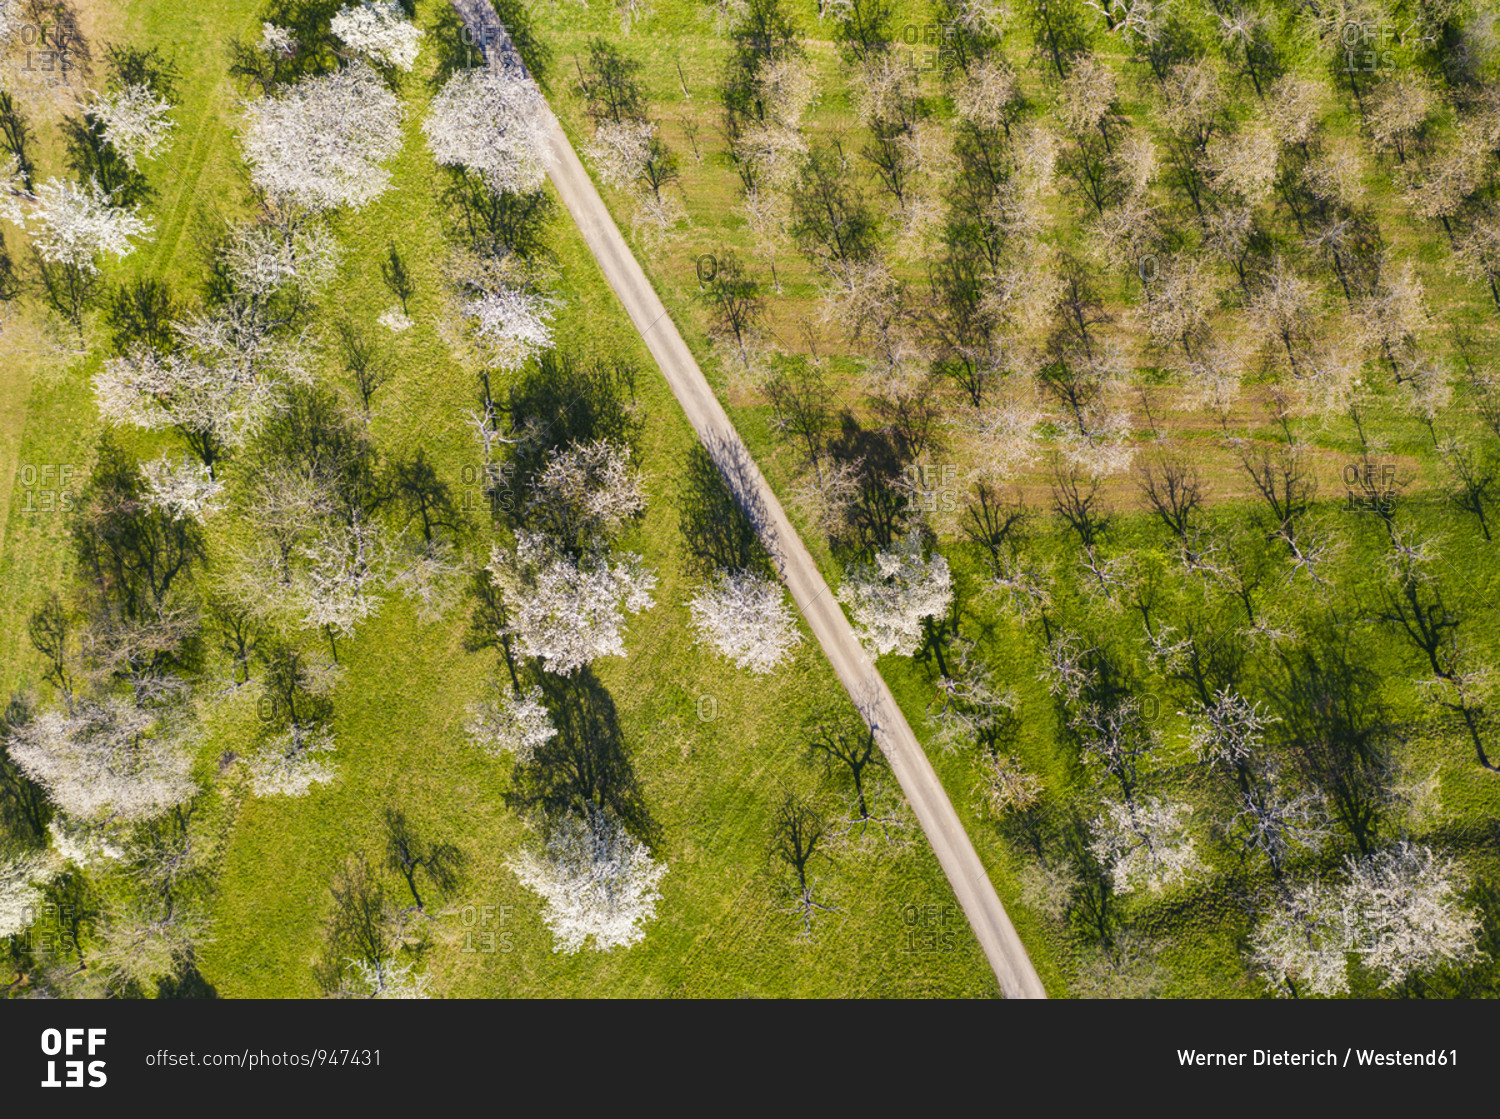 Germany- Baden-Wurttemberg- Neidlingen- Drone view of dirt road stretching across countryside orchard in spring